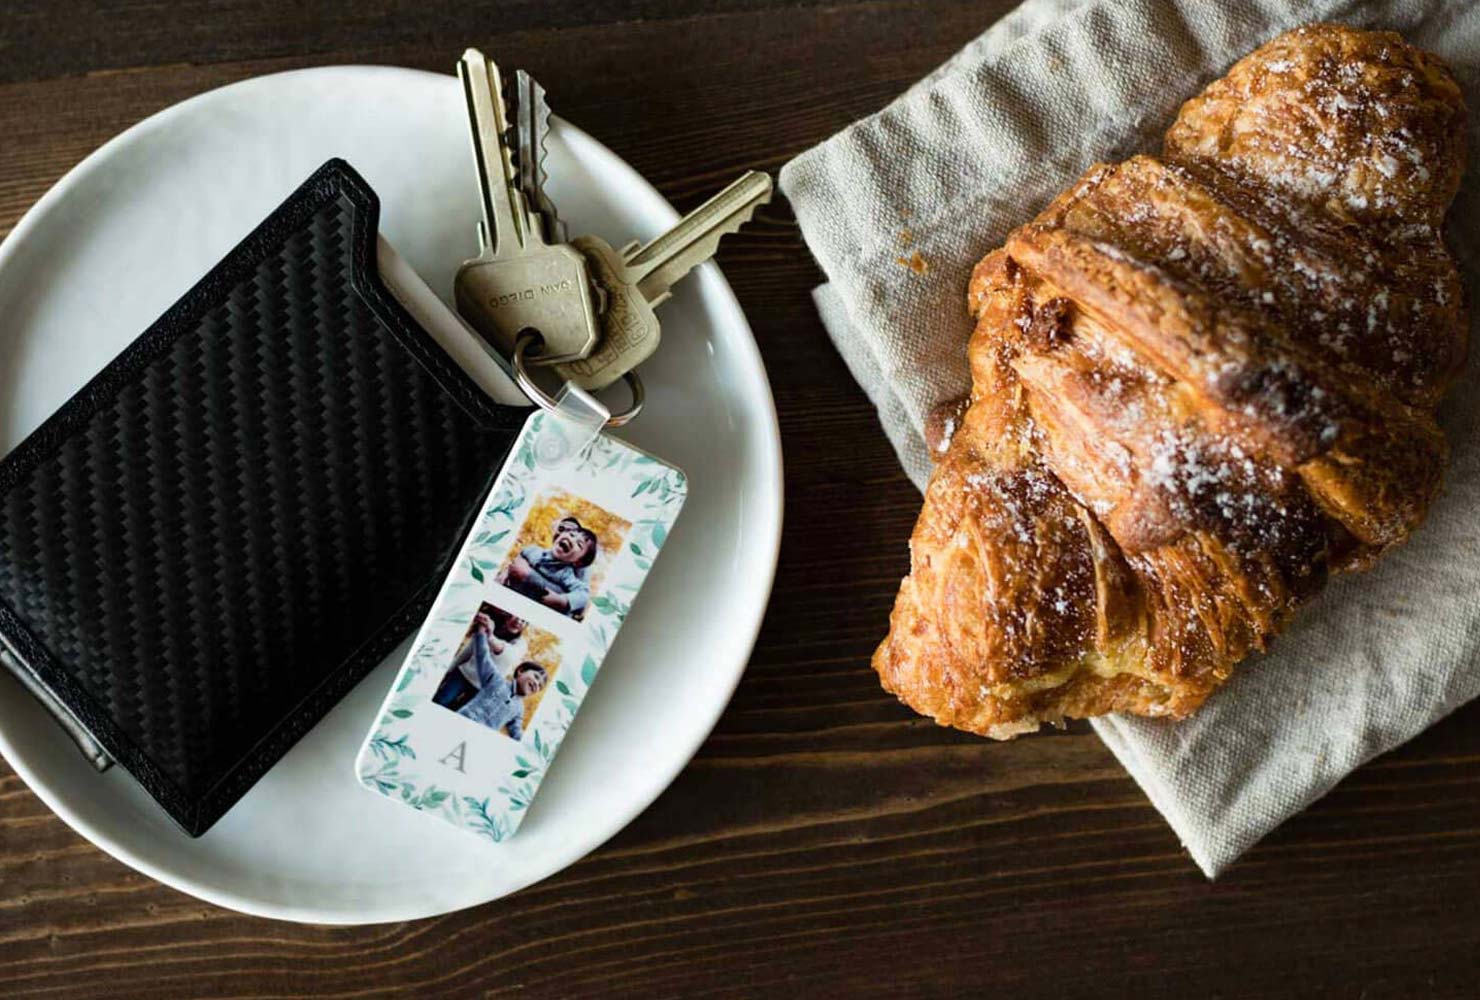 Photo keychain and wallet on a table with a croissant.